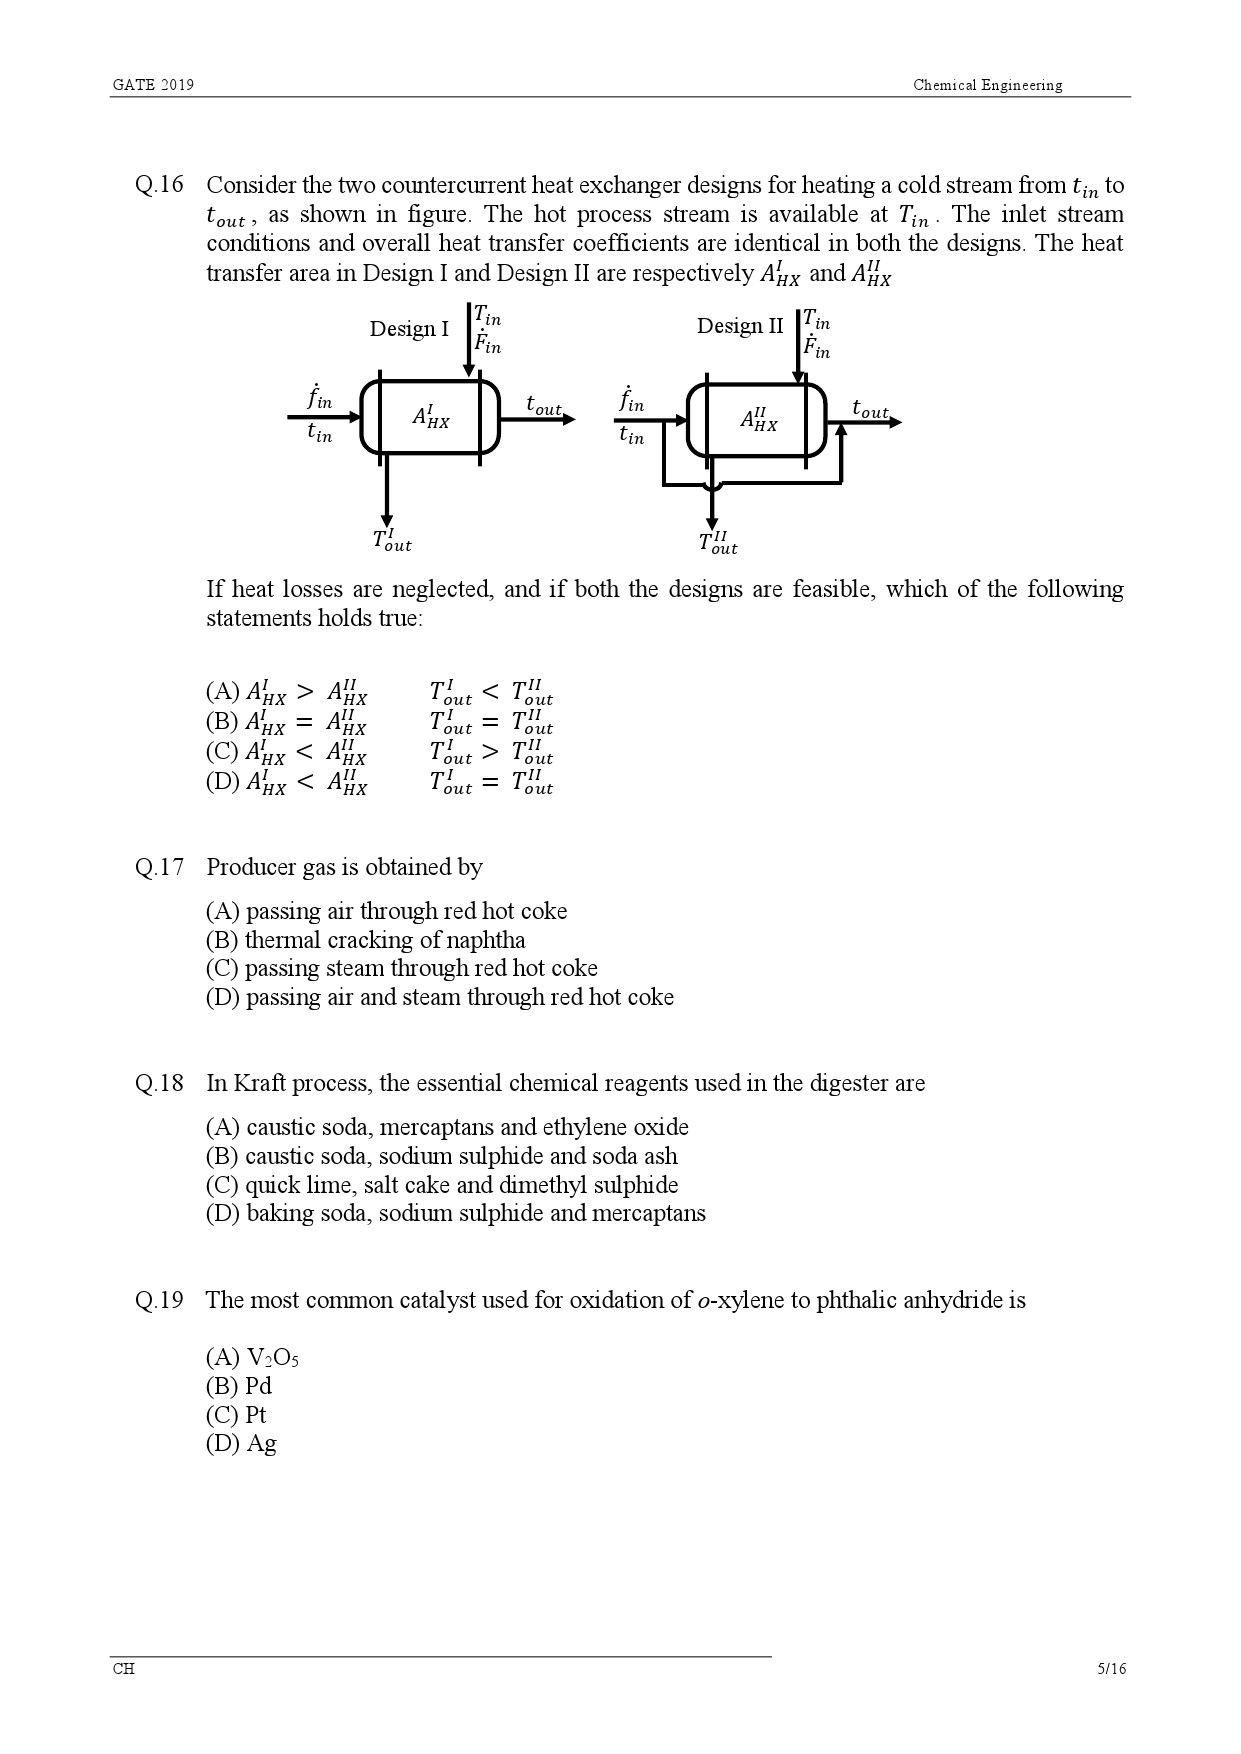 GATE Exam Question Paper 2019 Chemical Engineering 8